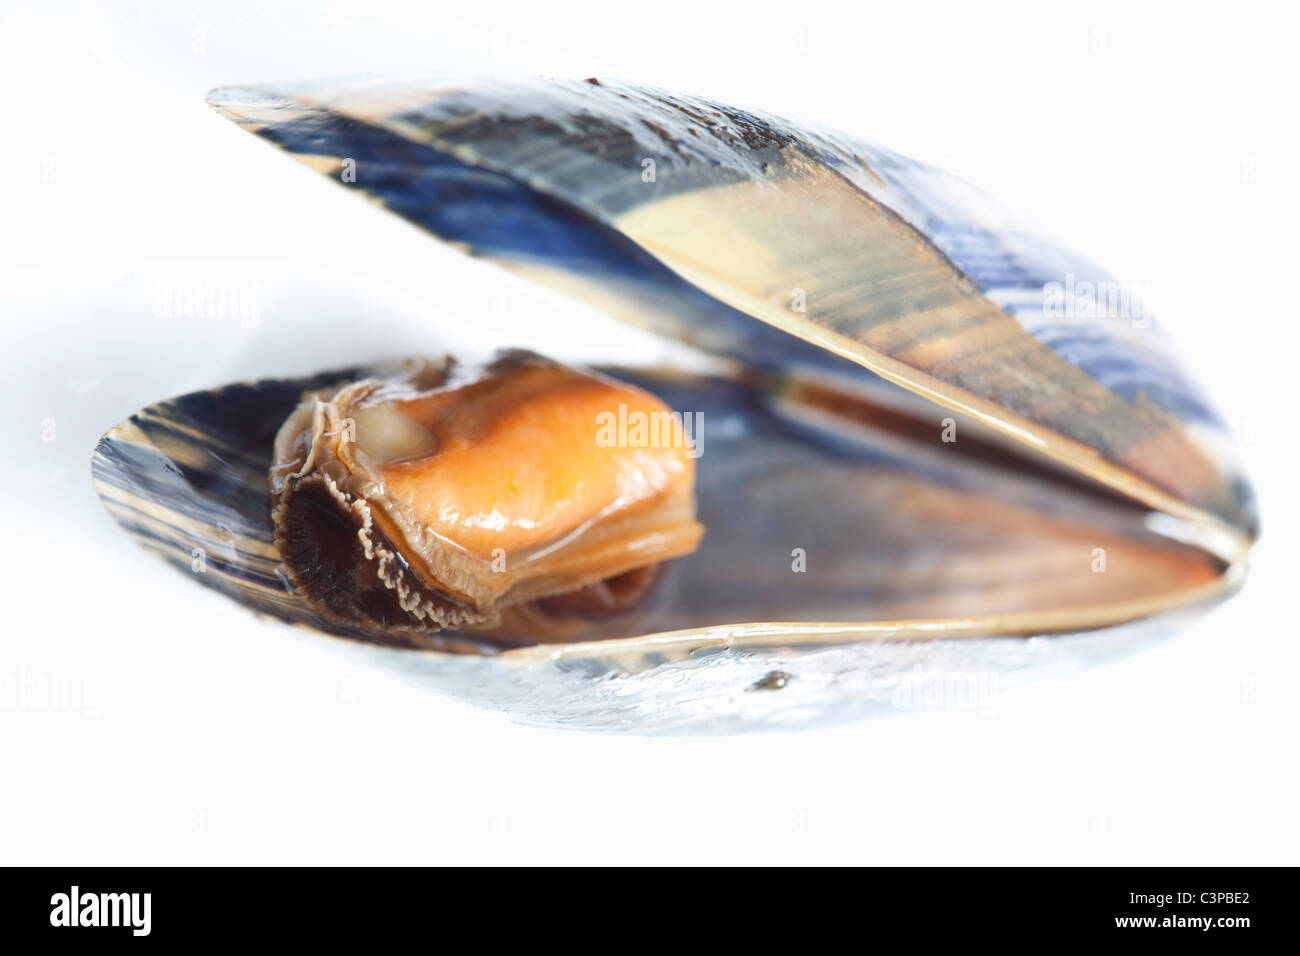 Open Mussel, close-up Stock Photo